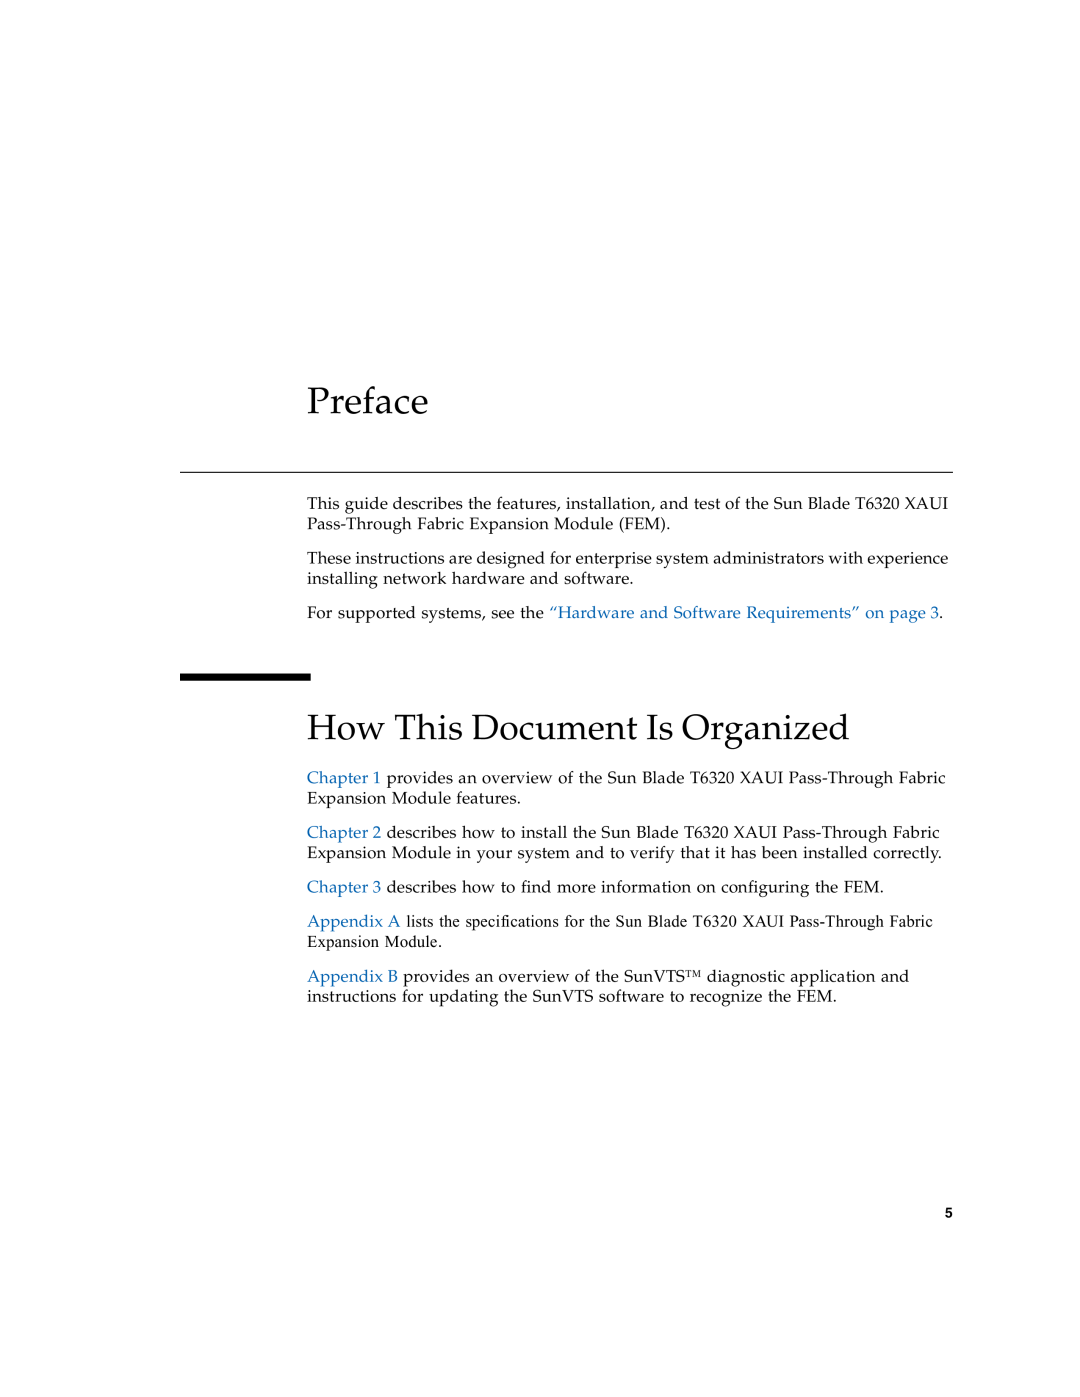 Sun Microsystems T6320 manual Preface, How This Document Is Organized 